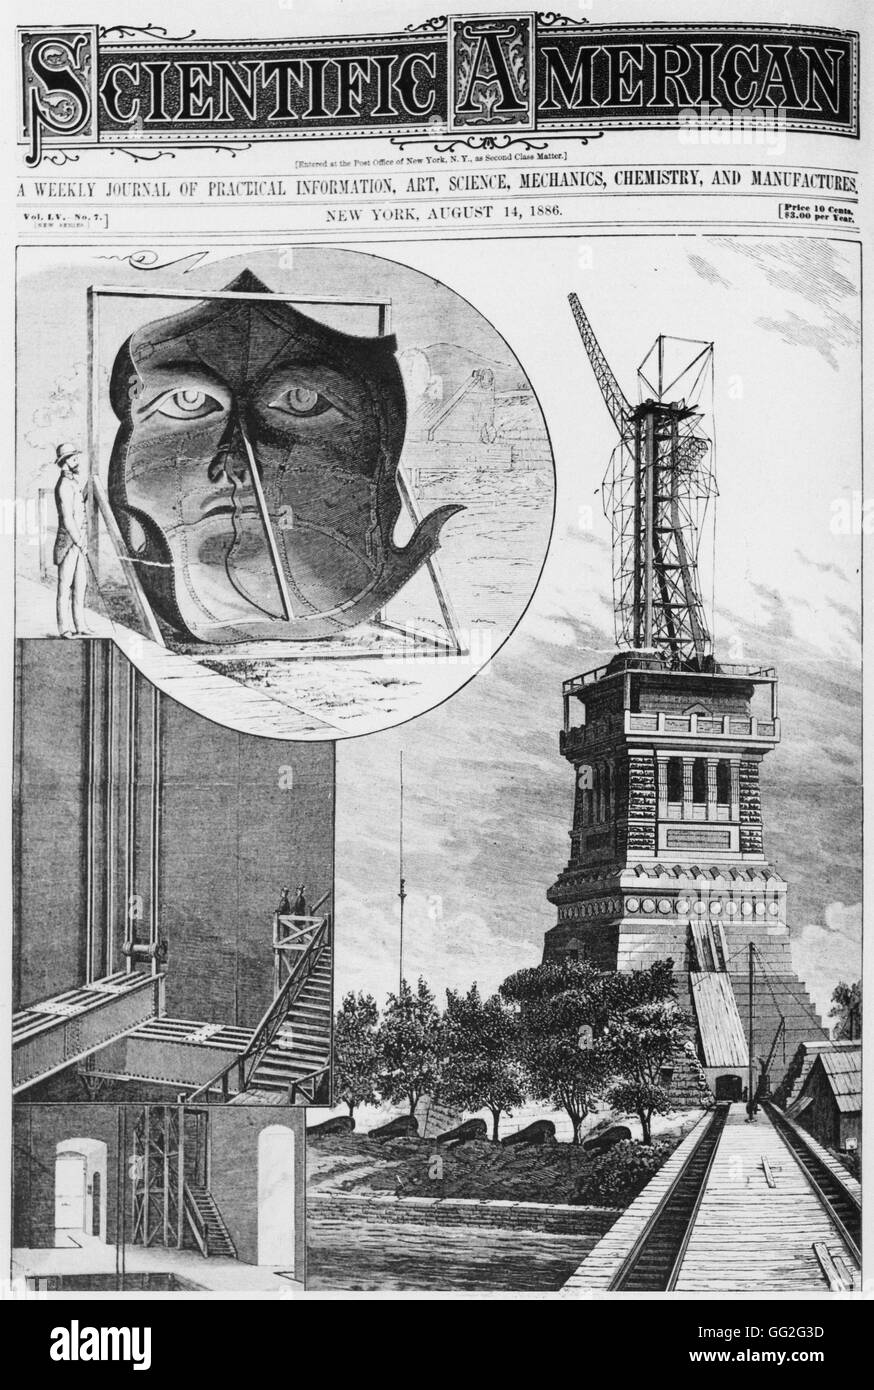 Front page of The Scientific American, August 14, 1886: Construction of the Statue of Liberty. Stock Photo